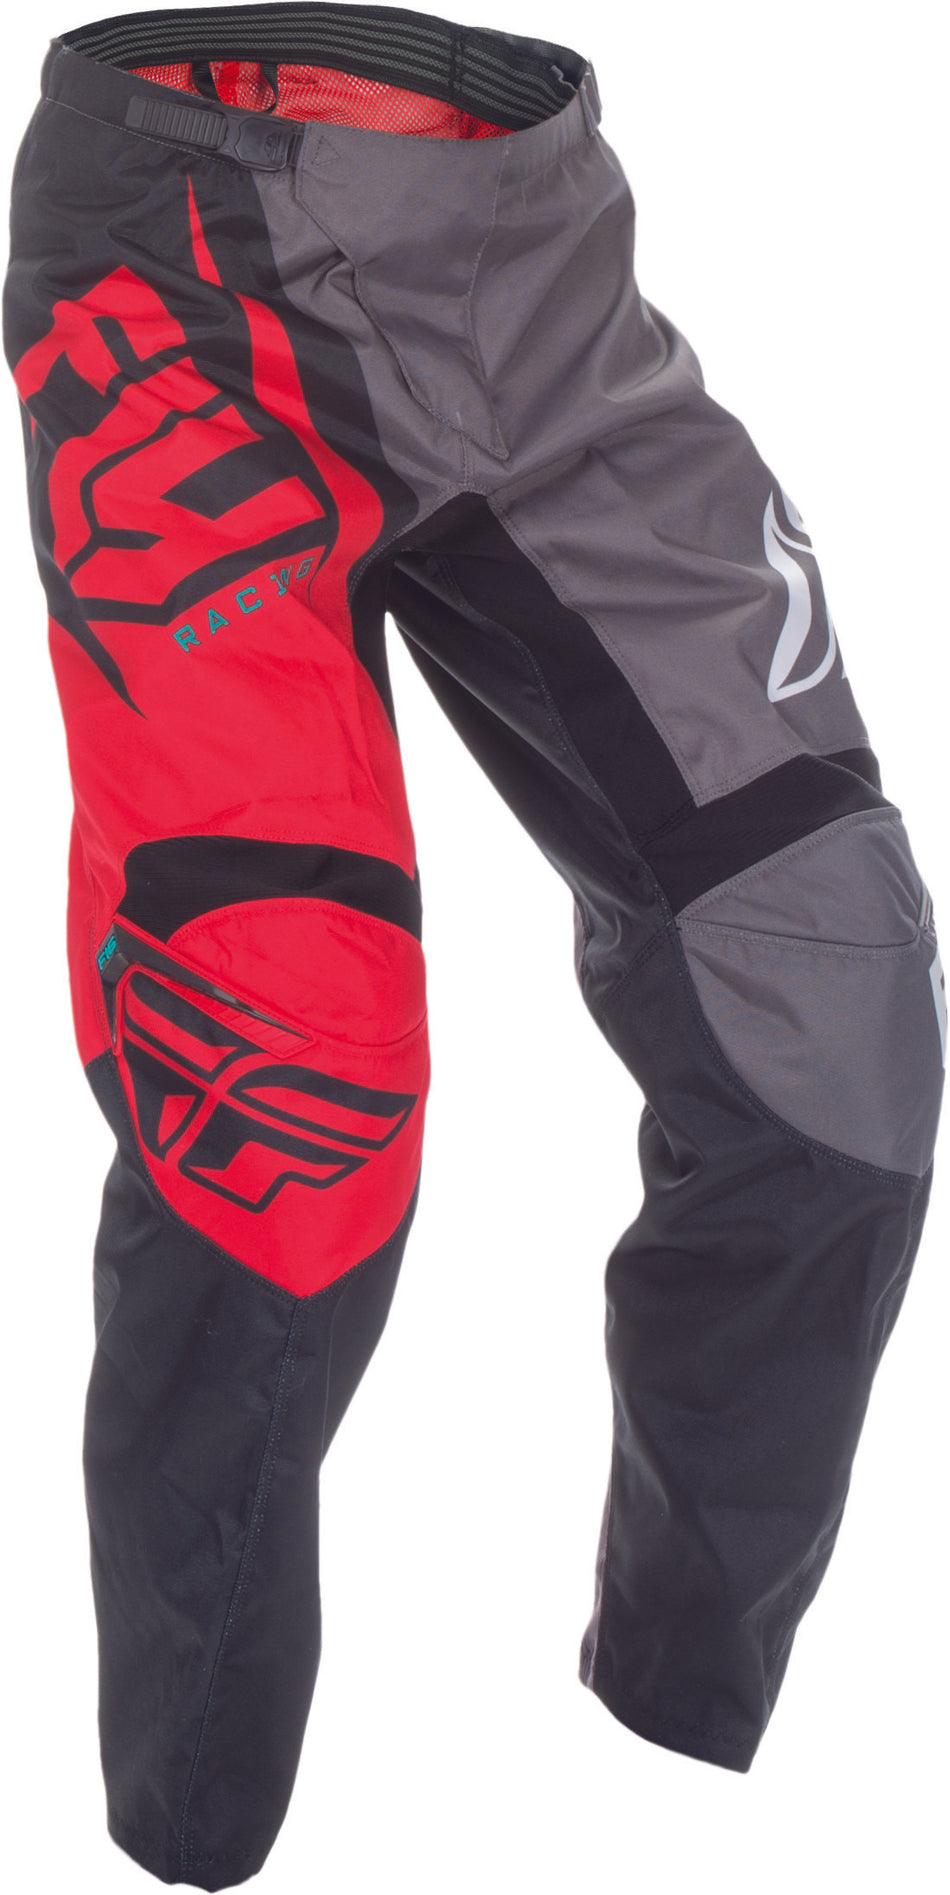 FLY RACING F-16 Pant Red/Black/Grey Sz 24 370-93224